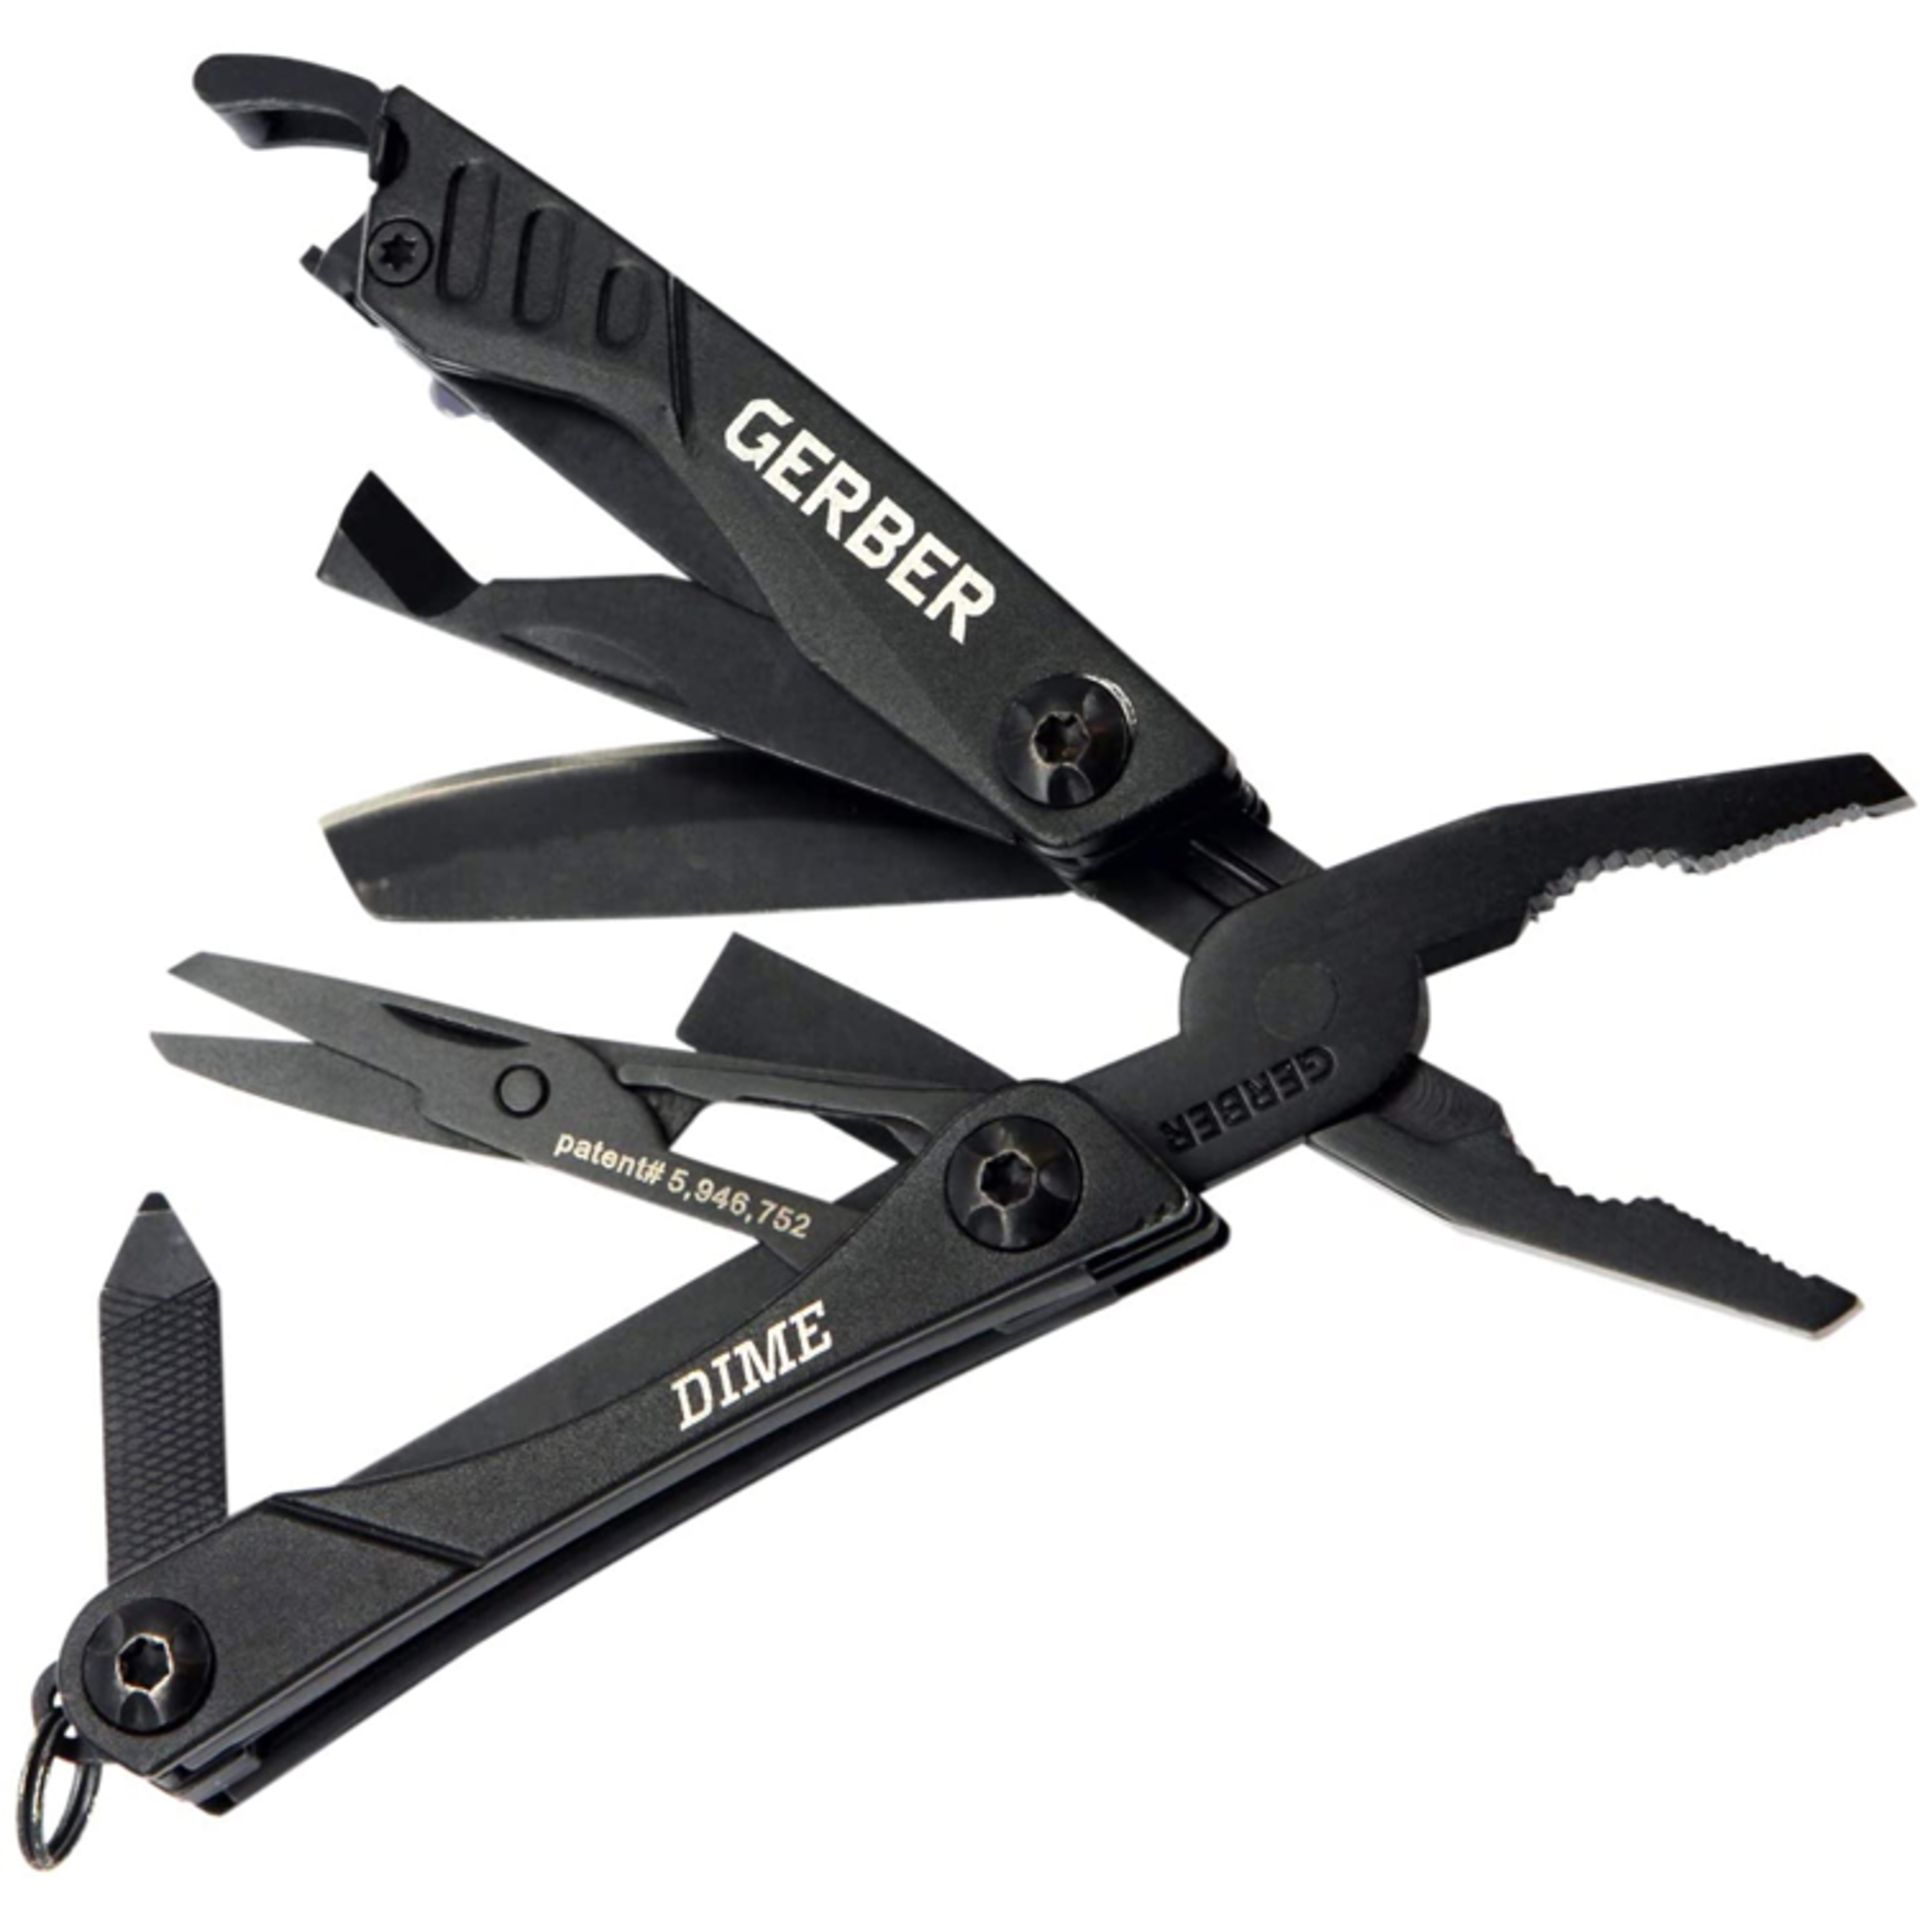 5 x Gerber Dime Pocket Micro Tool, Black - Spring loaded needle nose pliers, Standard pliers, Wire